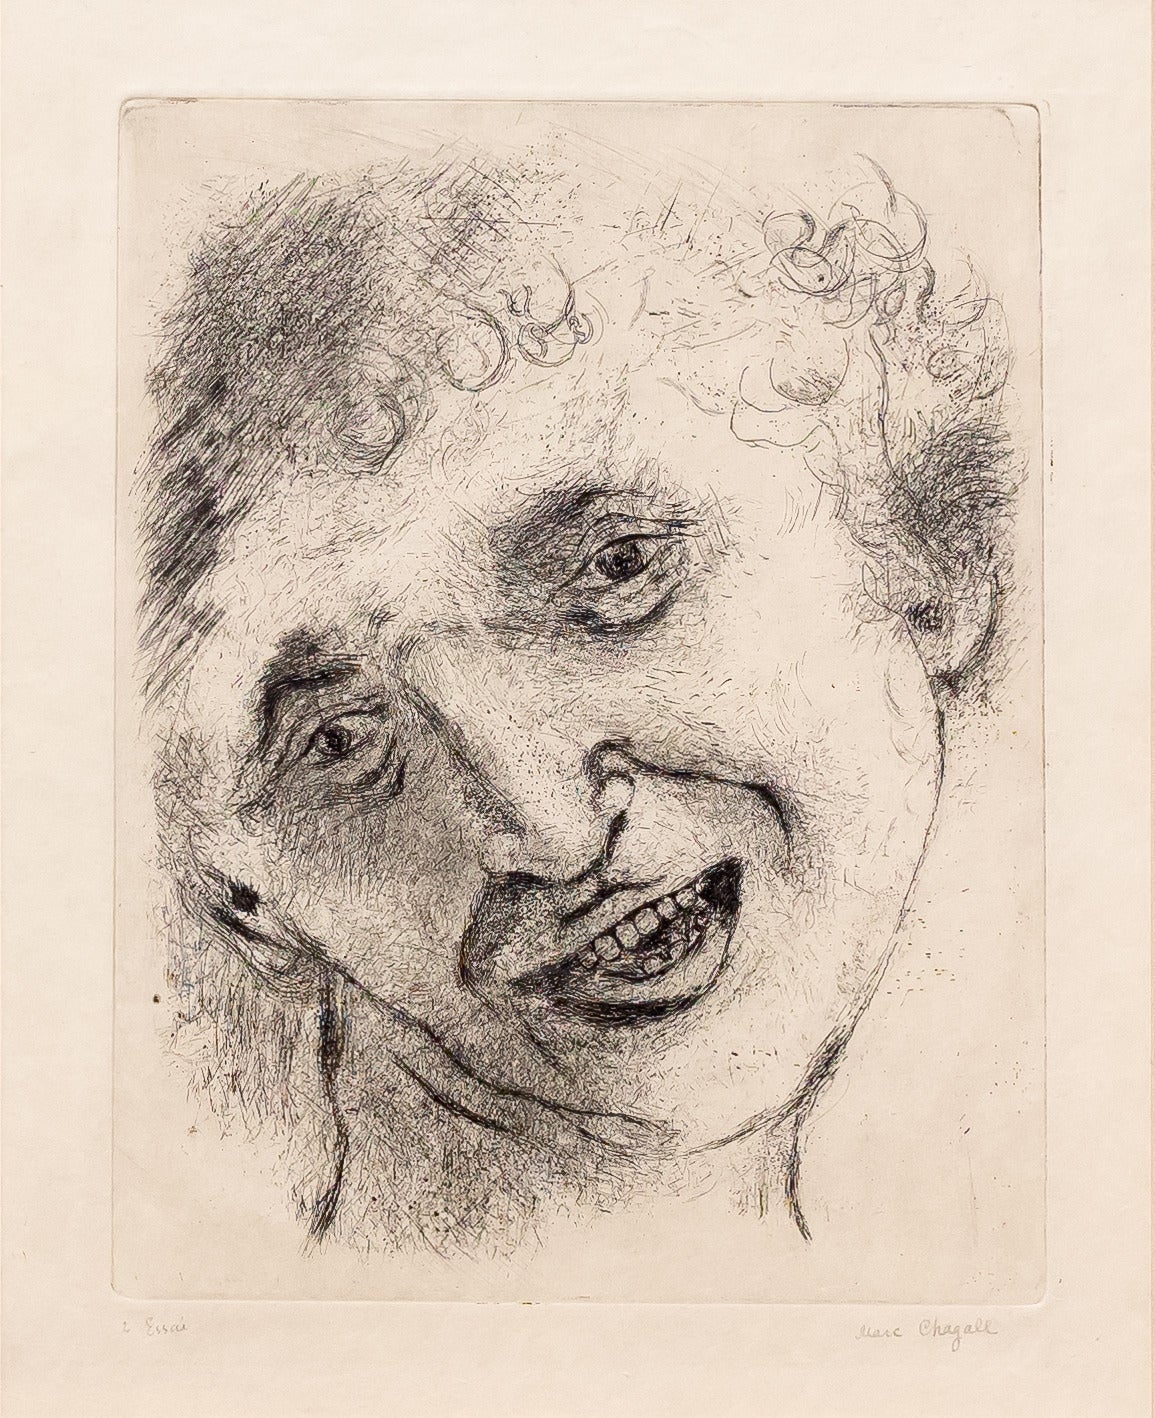 Self Portrait with a Laughing Expression - Print by Marc Chagall